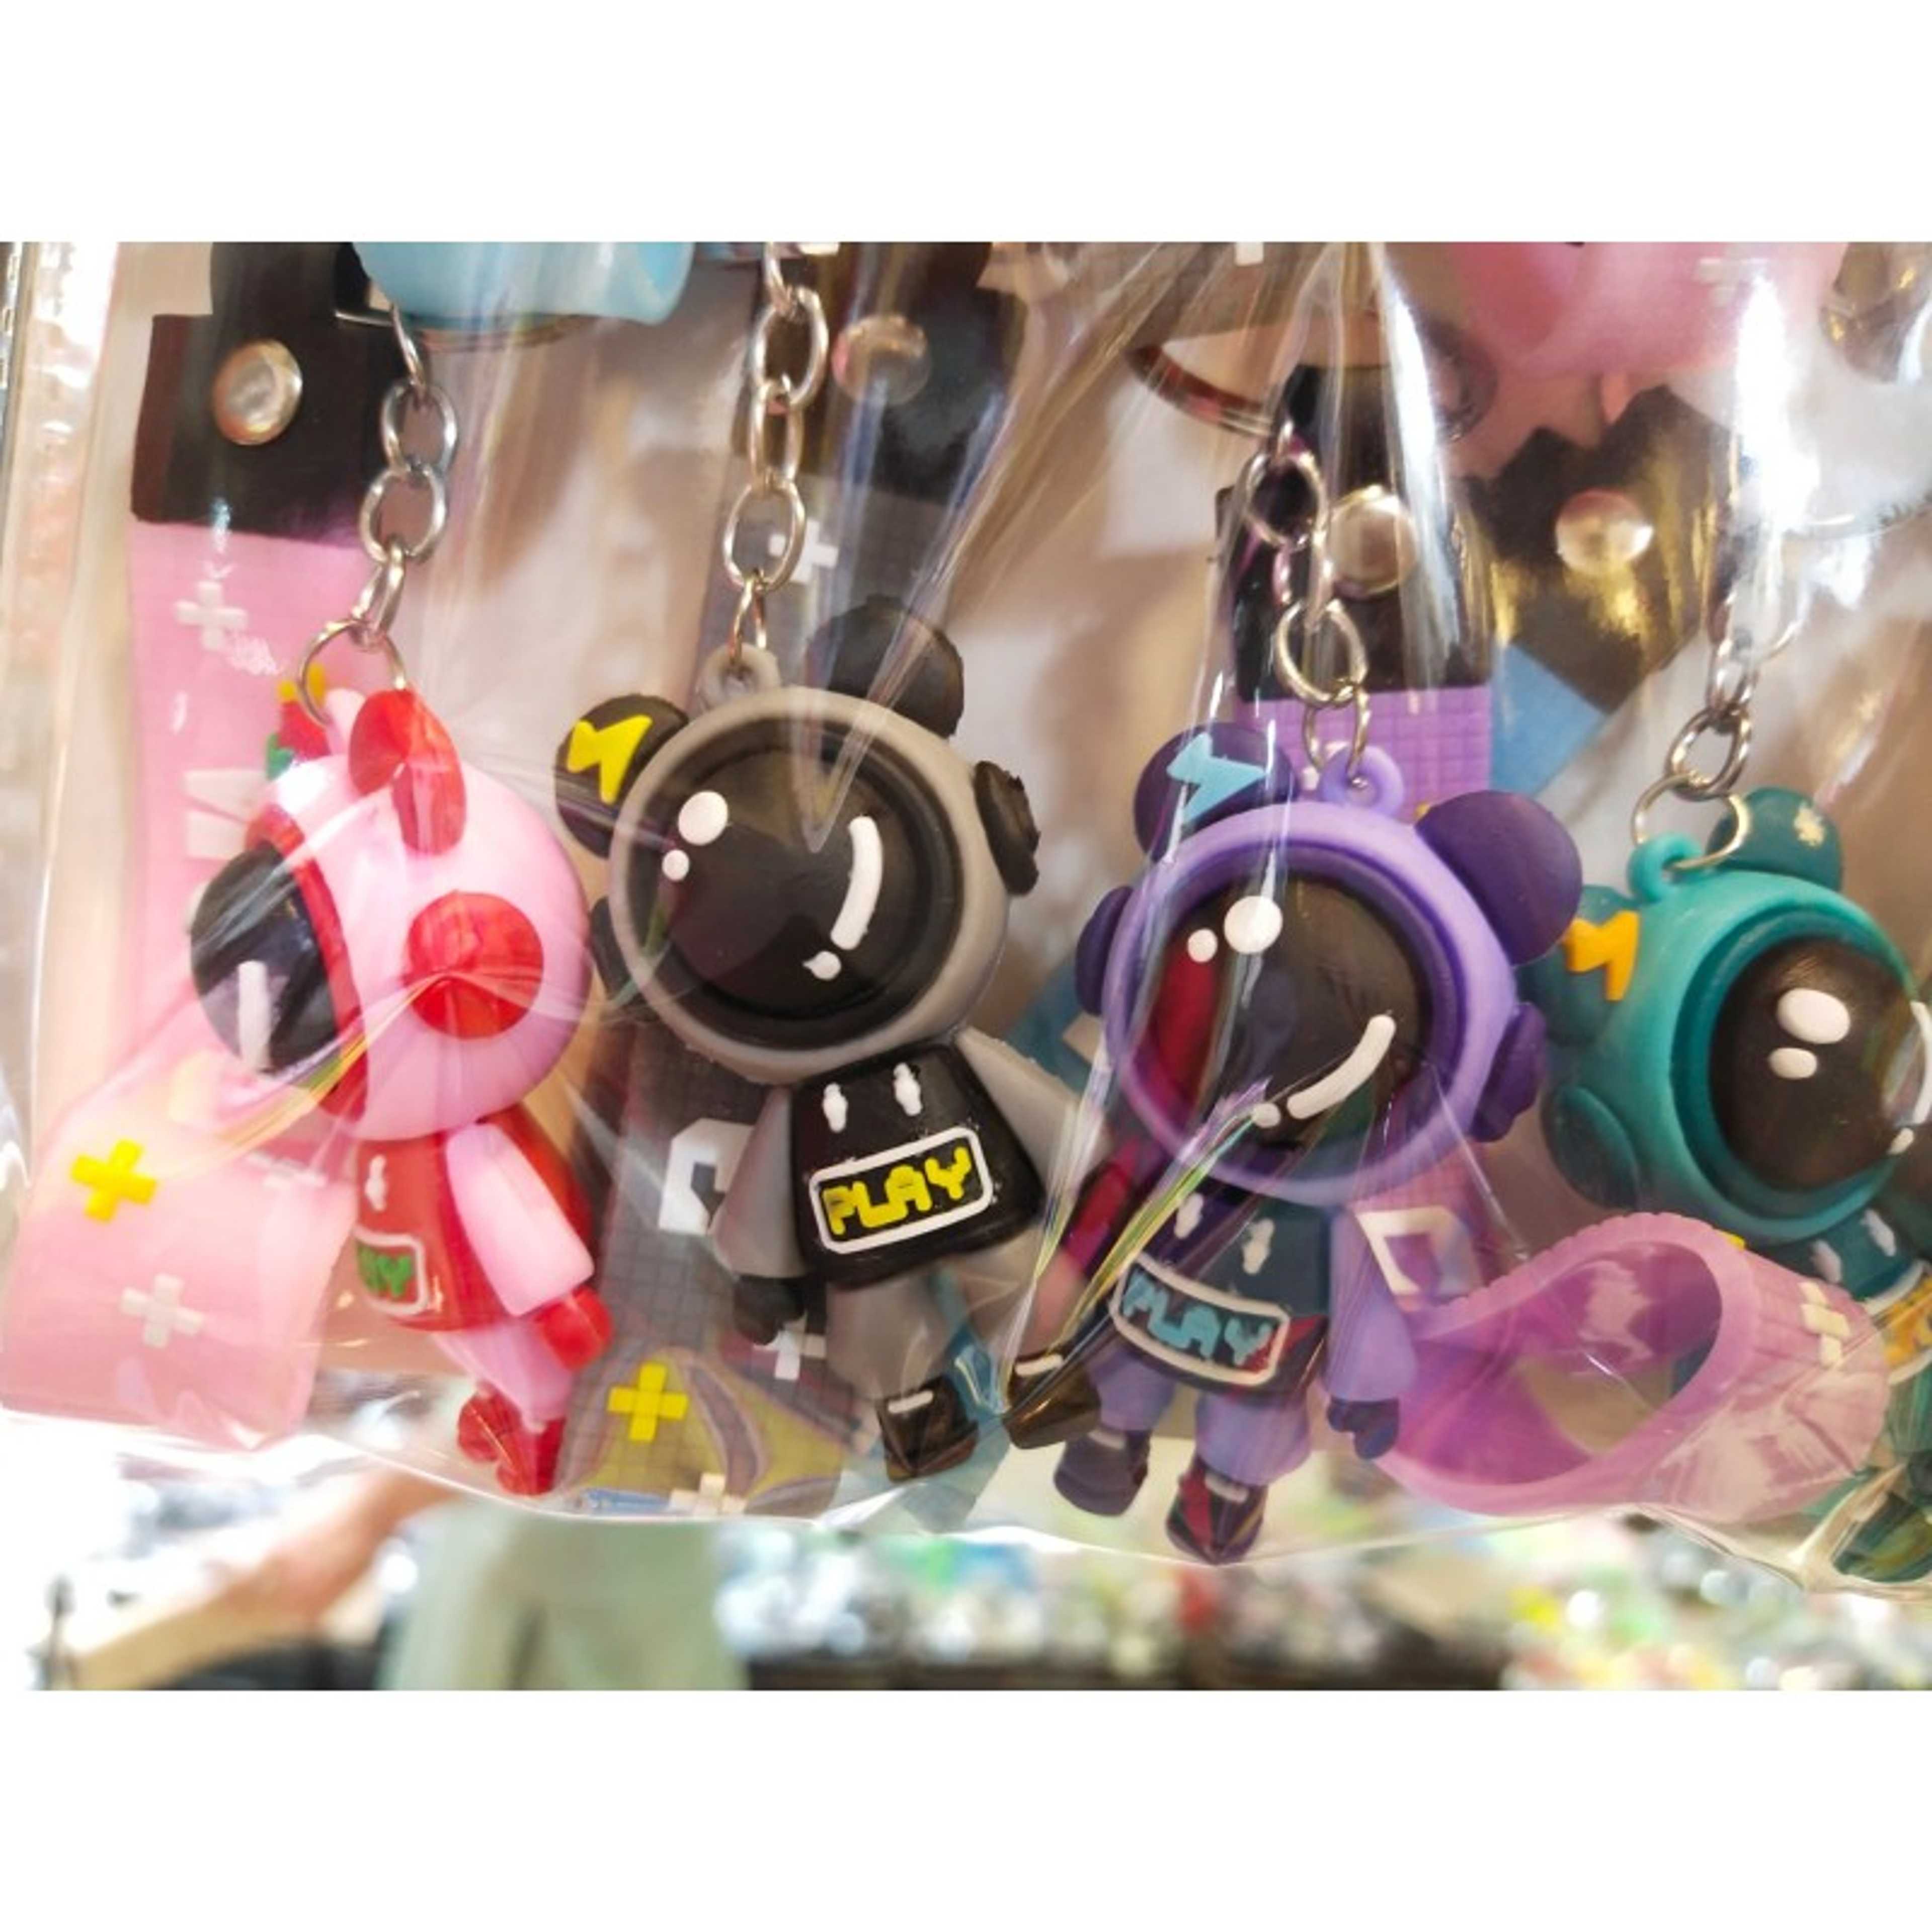 1-PC Motorcycle Collectable Strap Resin Astronaut Space Robot Keychain Bike Keyring Best Friend Couple Jewellery Men's Fashion Car Key Chains Doll keychain multicolour